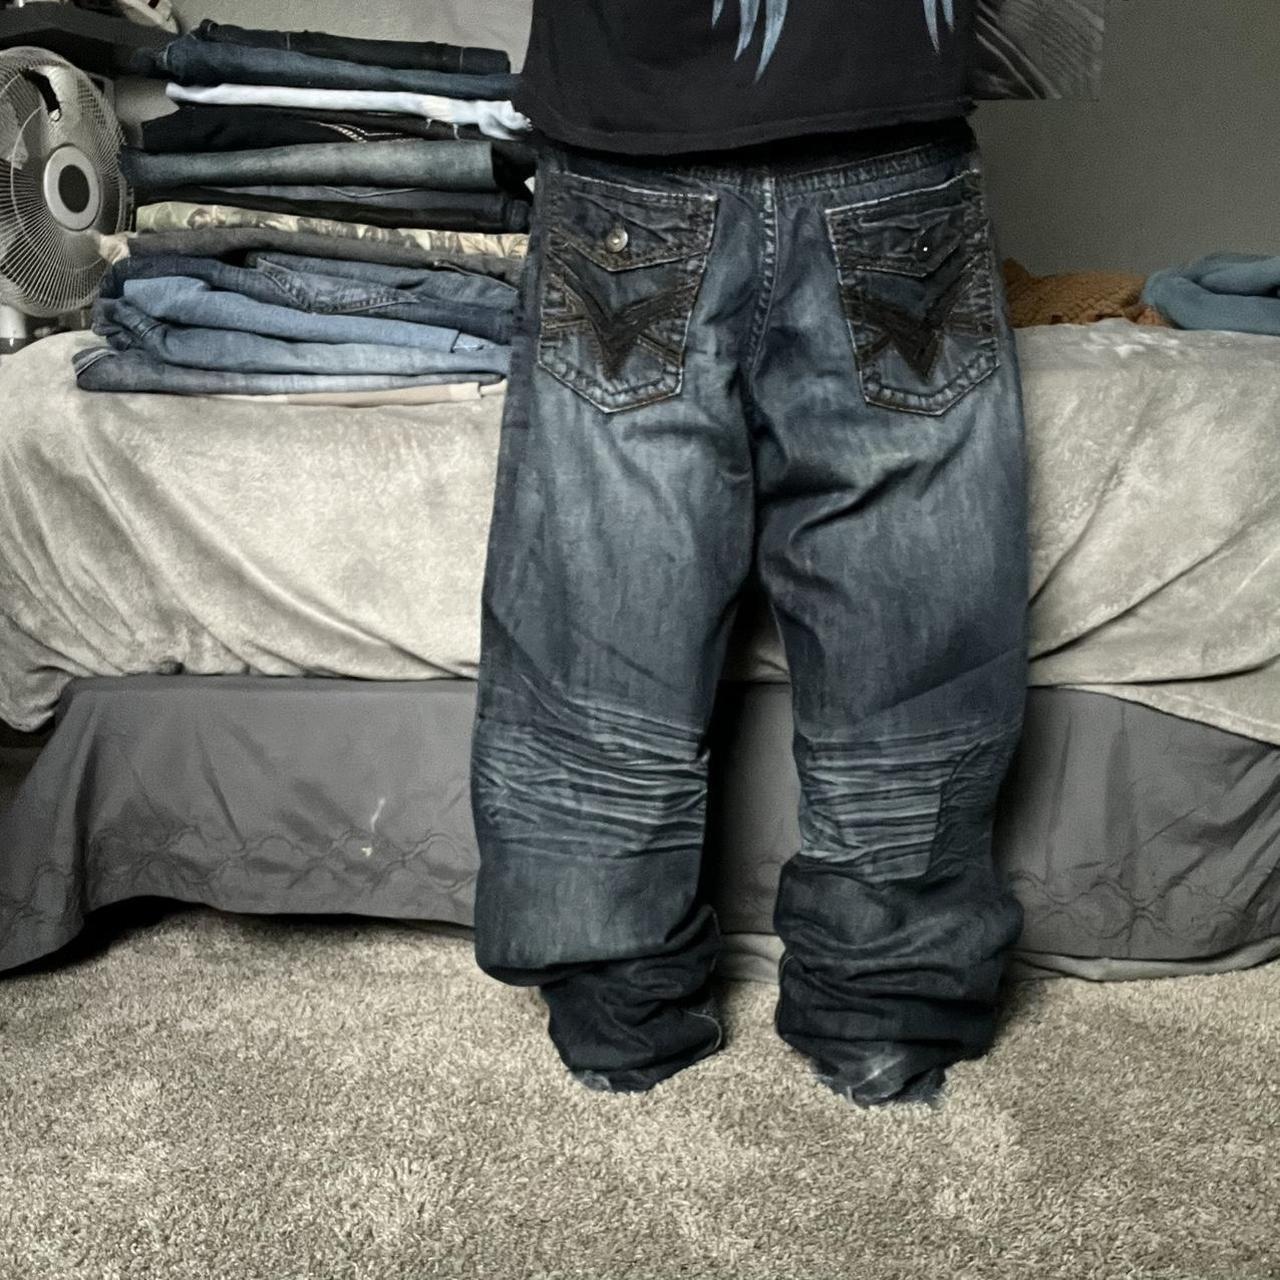 Insane pair of y2k helix jeans, really nice comfy... - Depop